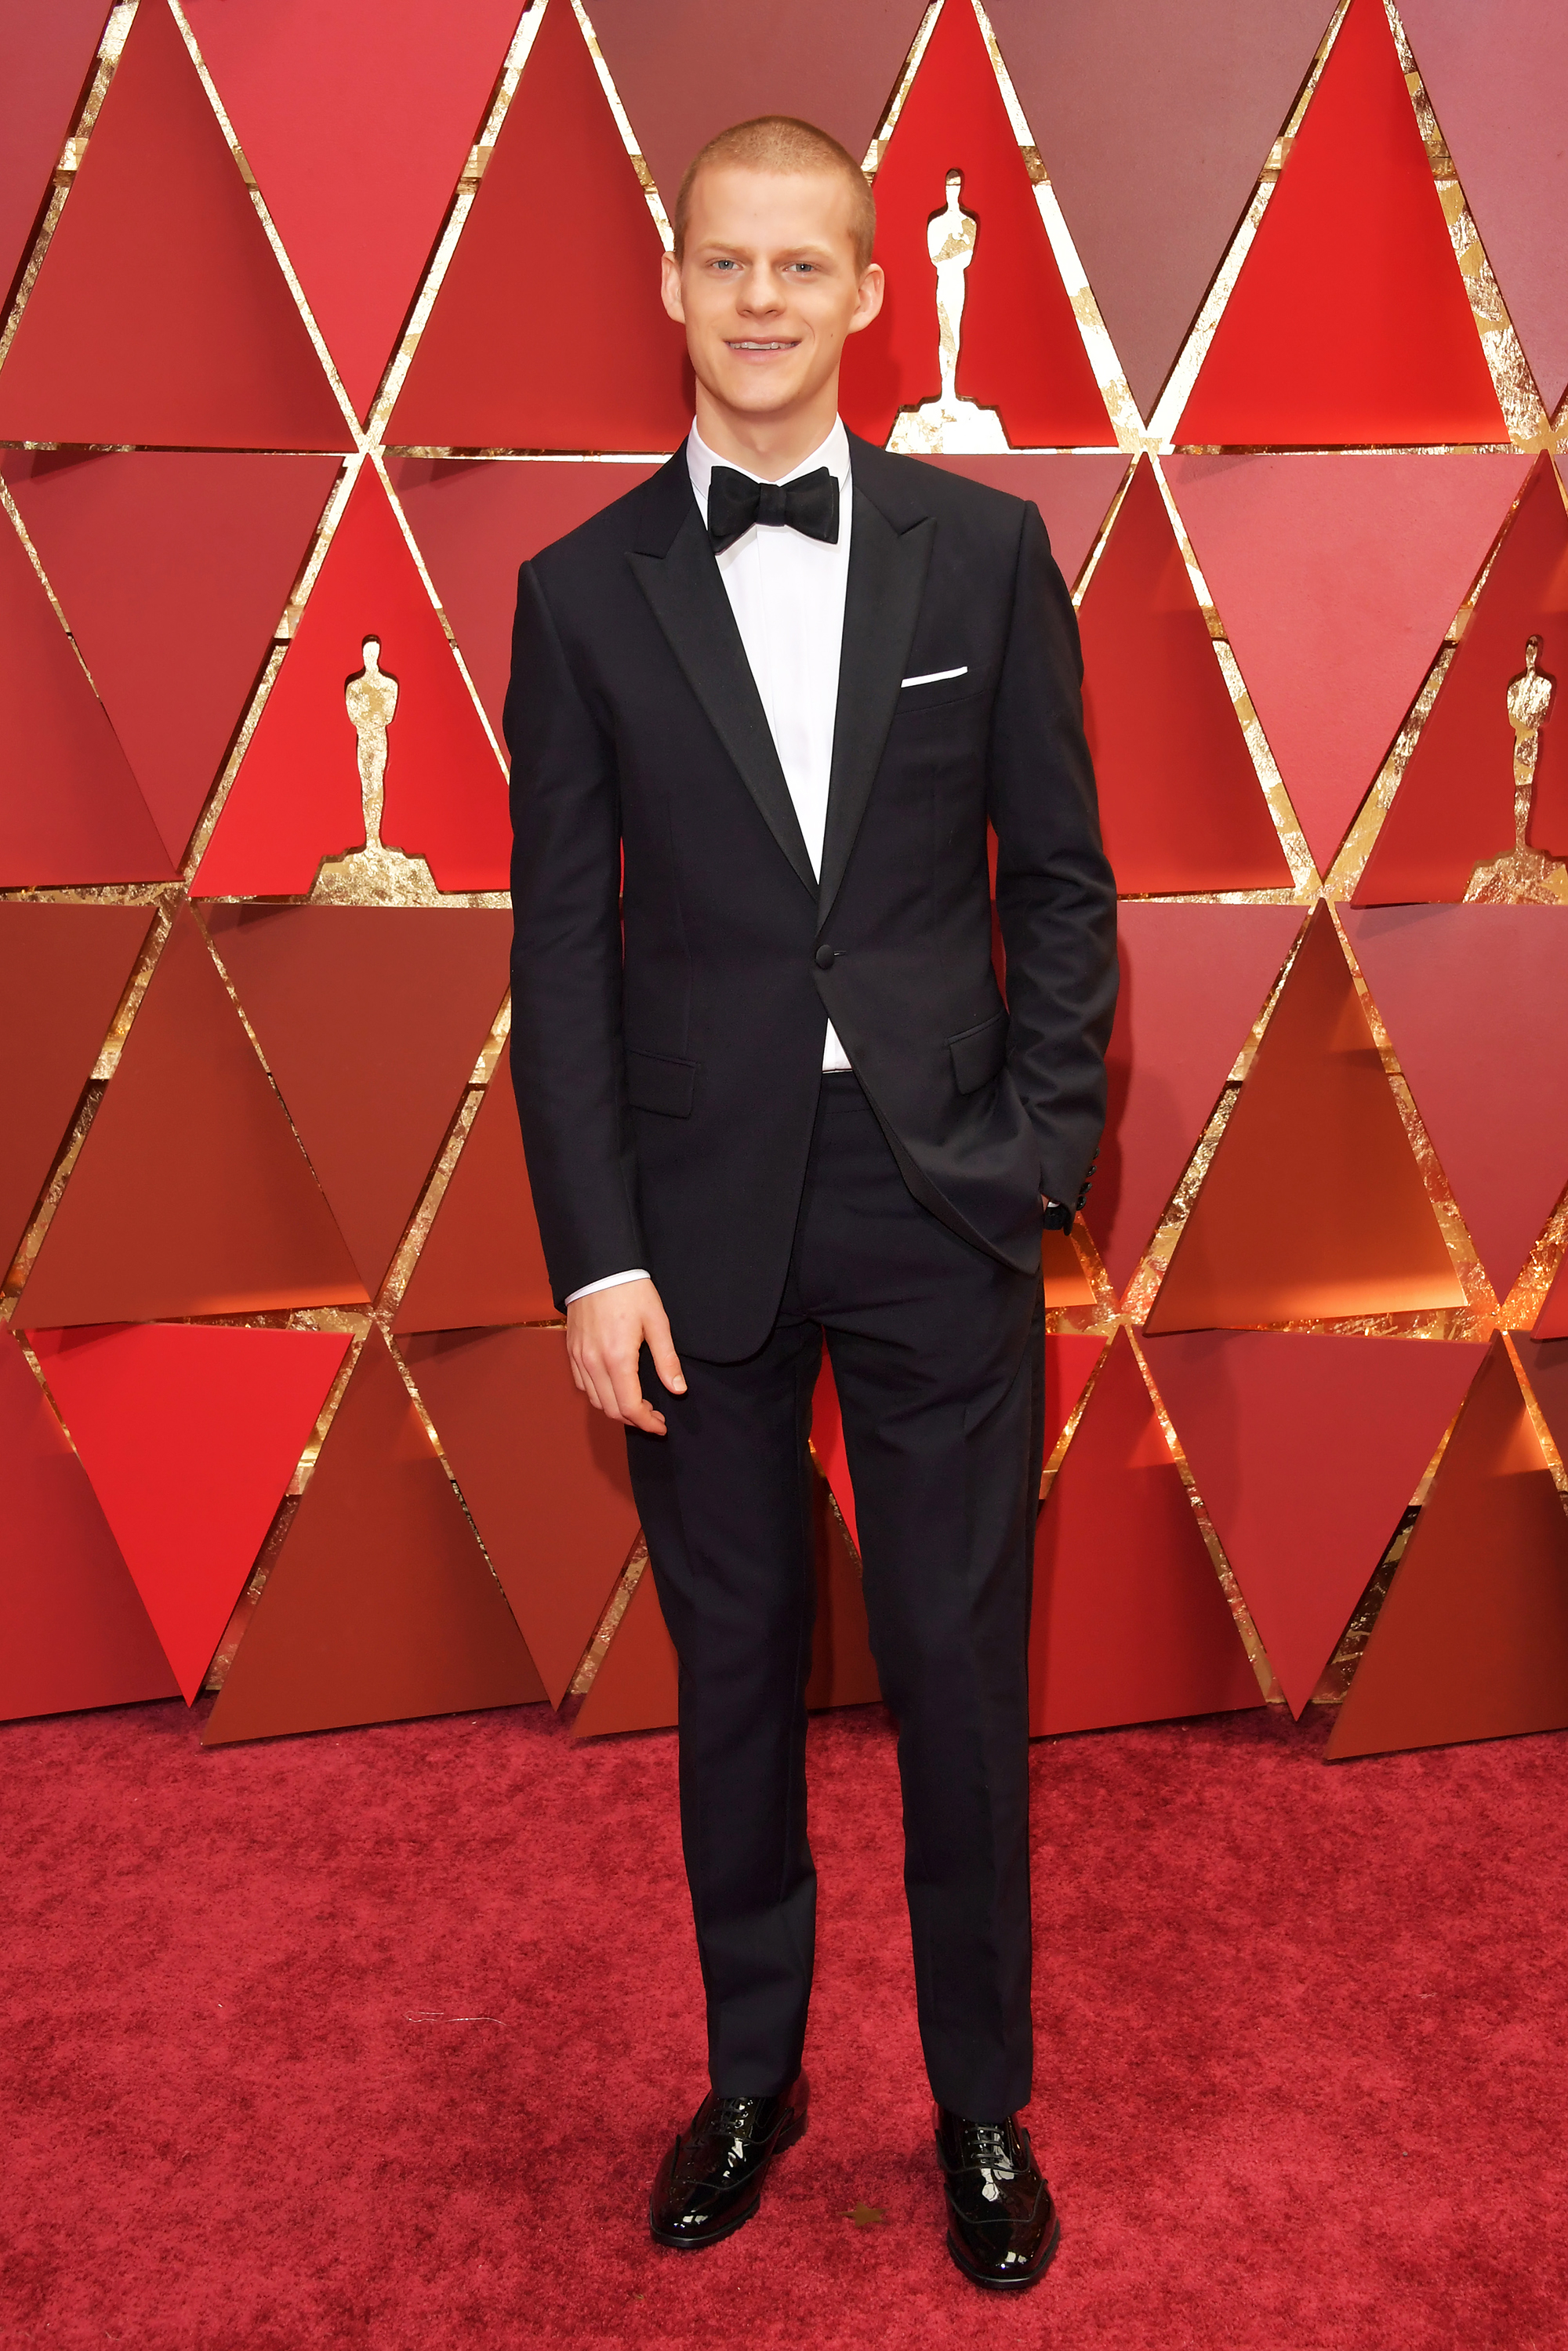 Lucas Hedges on the red carpet for the 89th Oscars, on Feb. 26, 2017 in Hollywood, Calif.